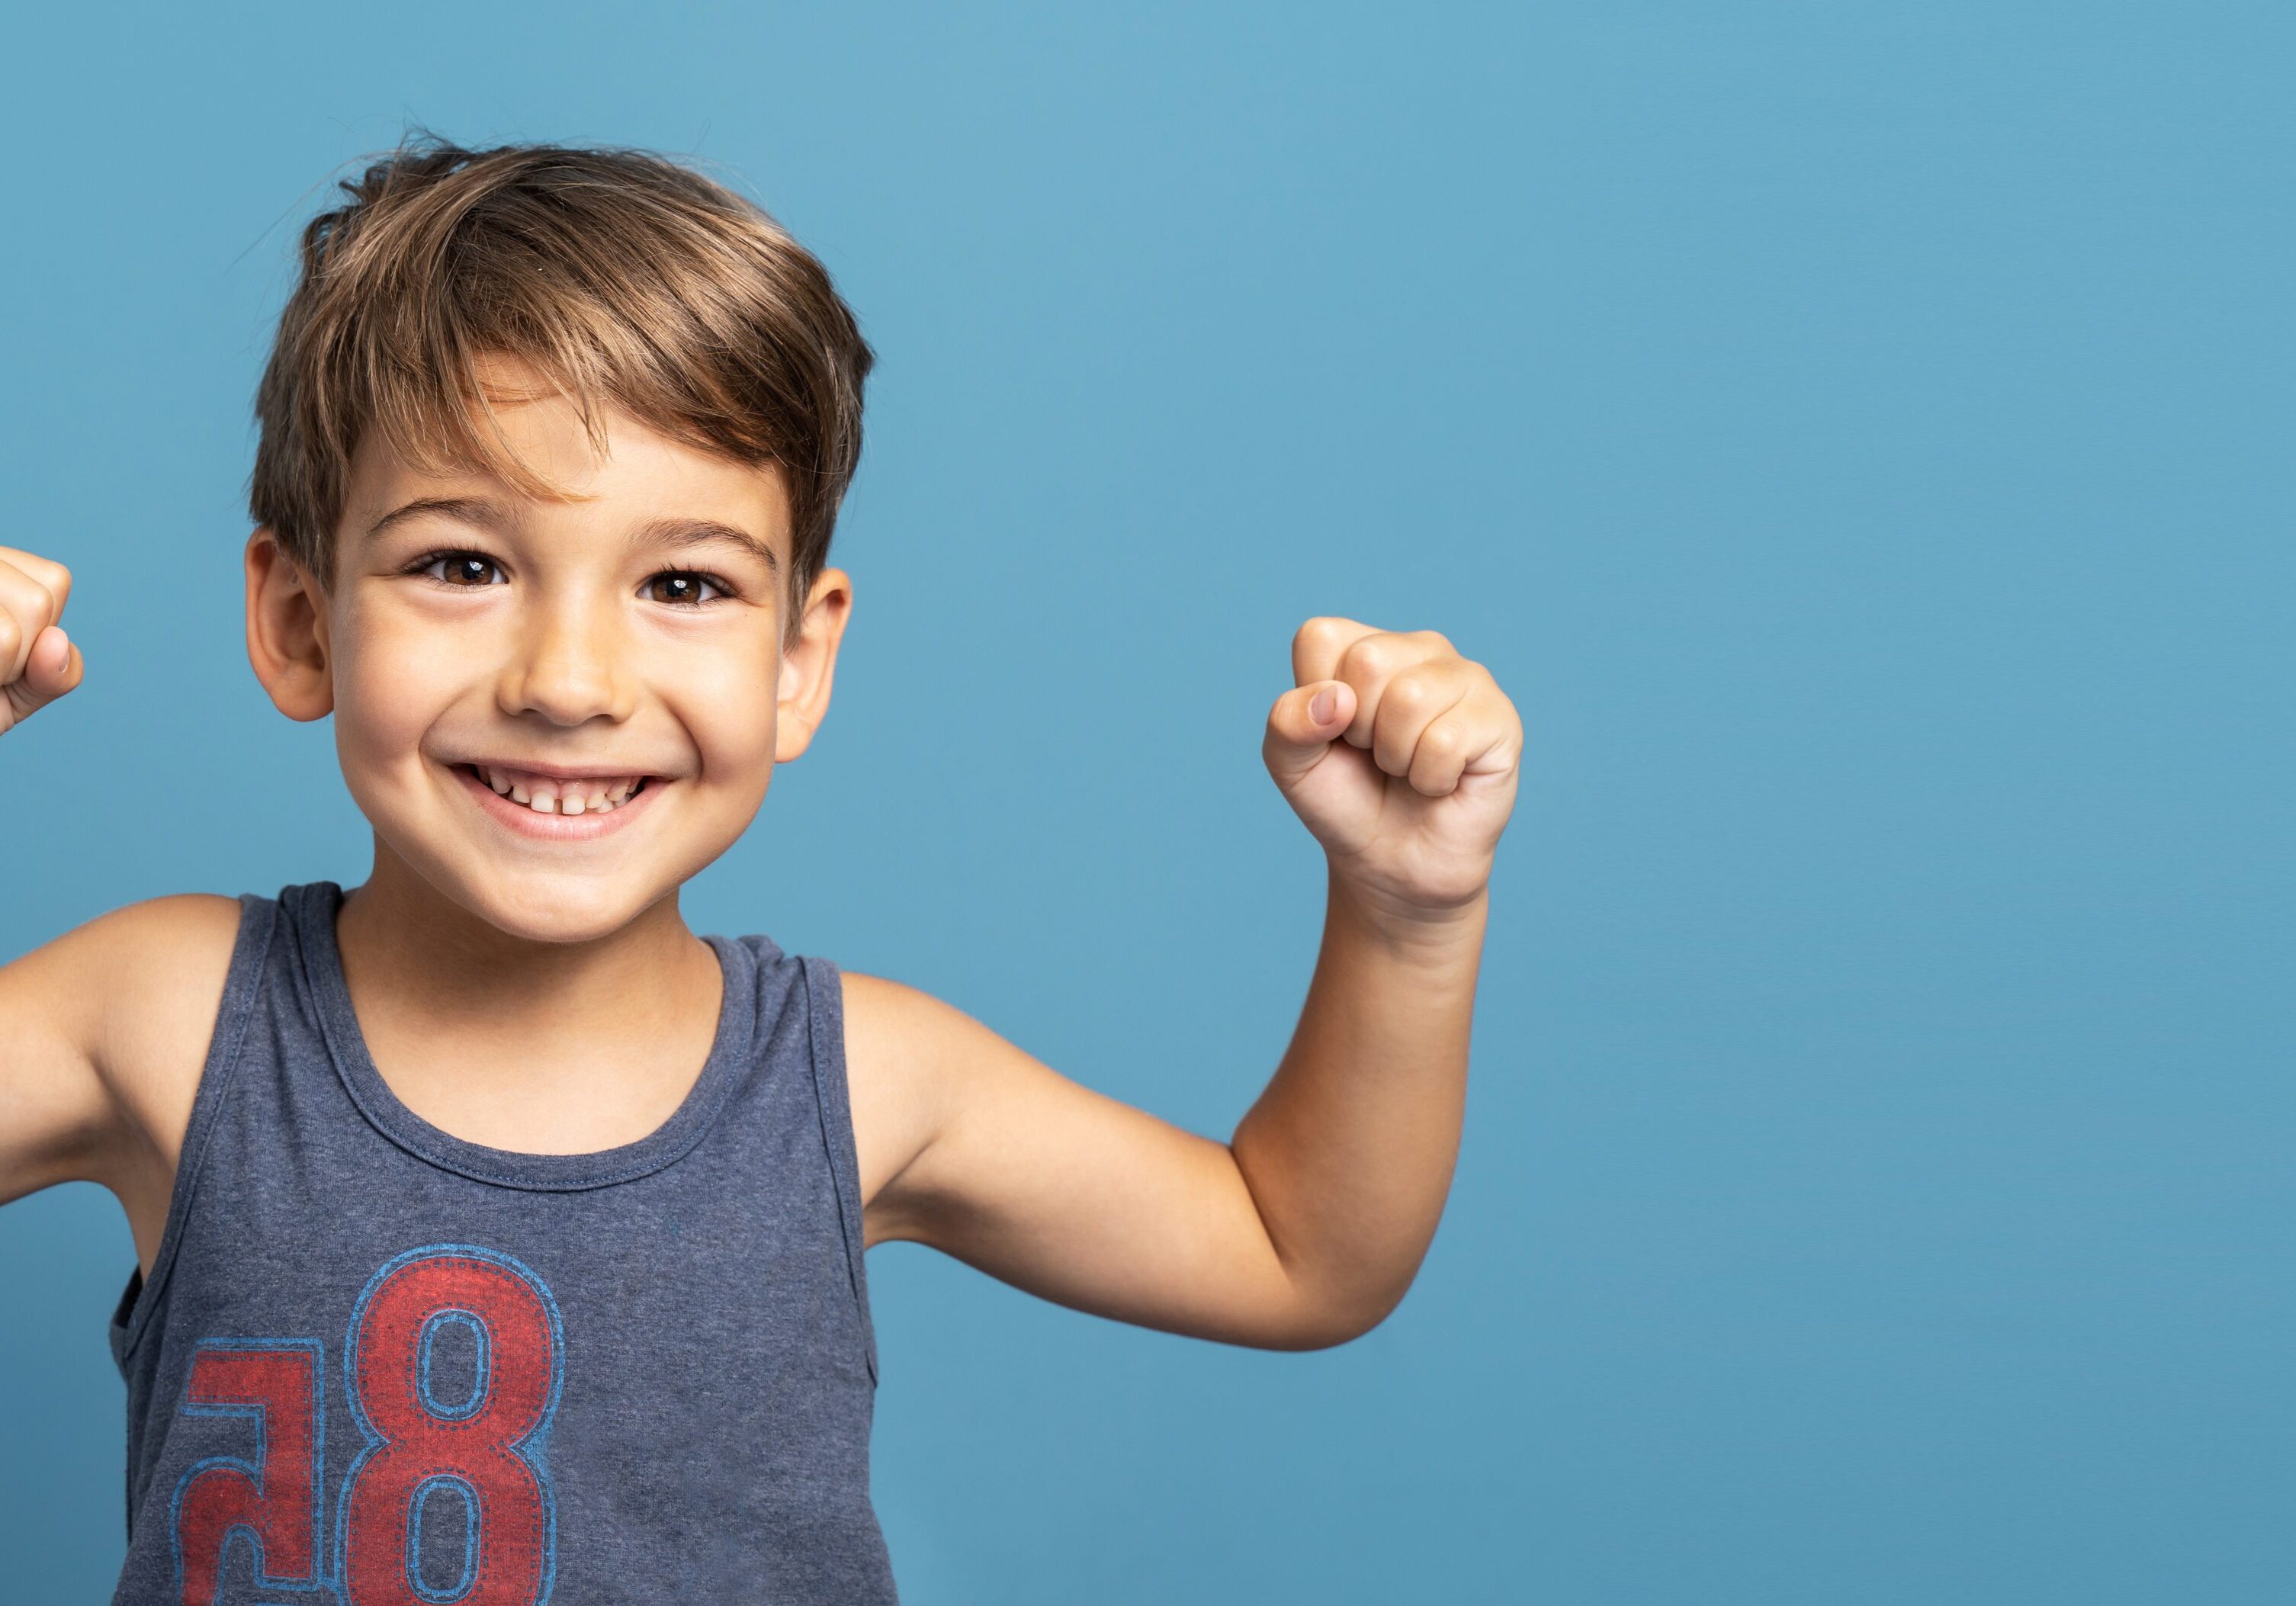 Front view of small caucasian boy four years old standing in front of blue background studio shot standing confident flexing muscles smiling growing up and strength and health concept